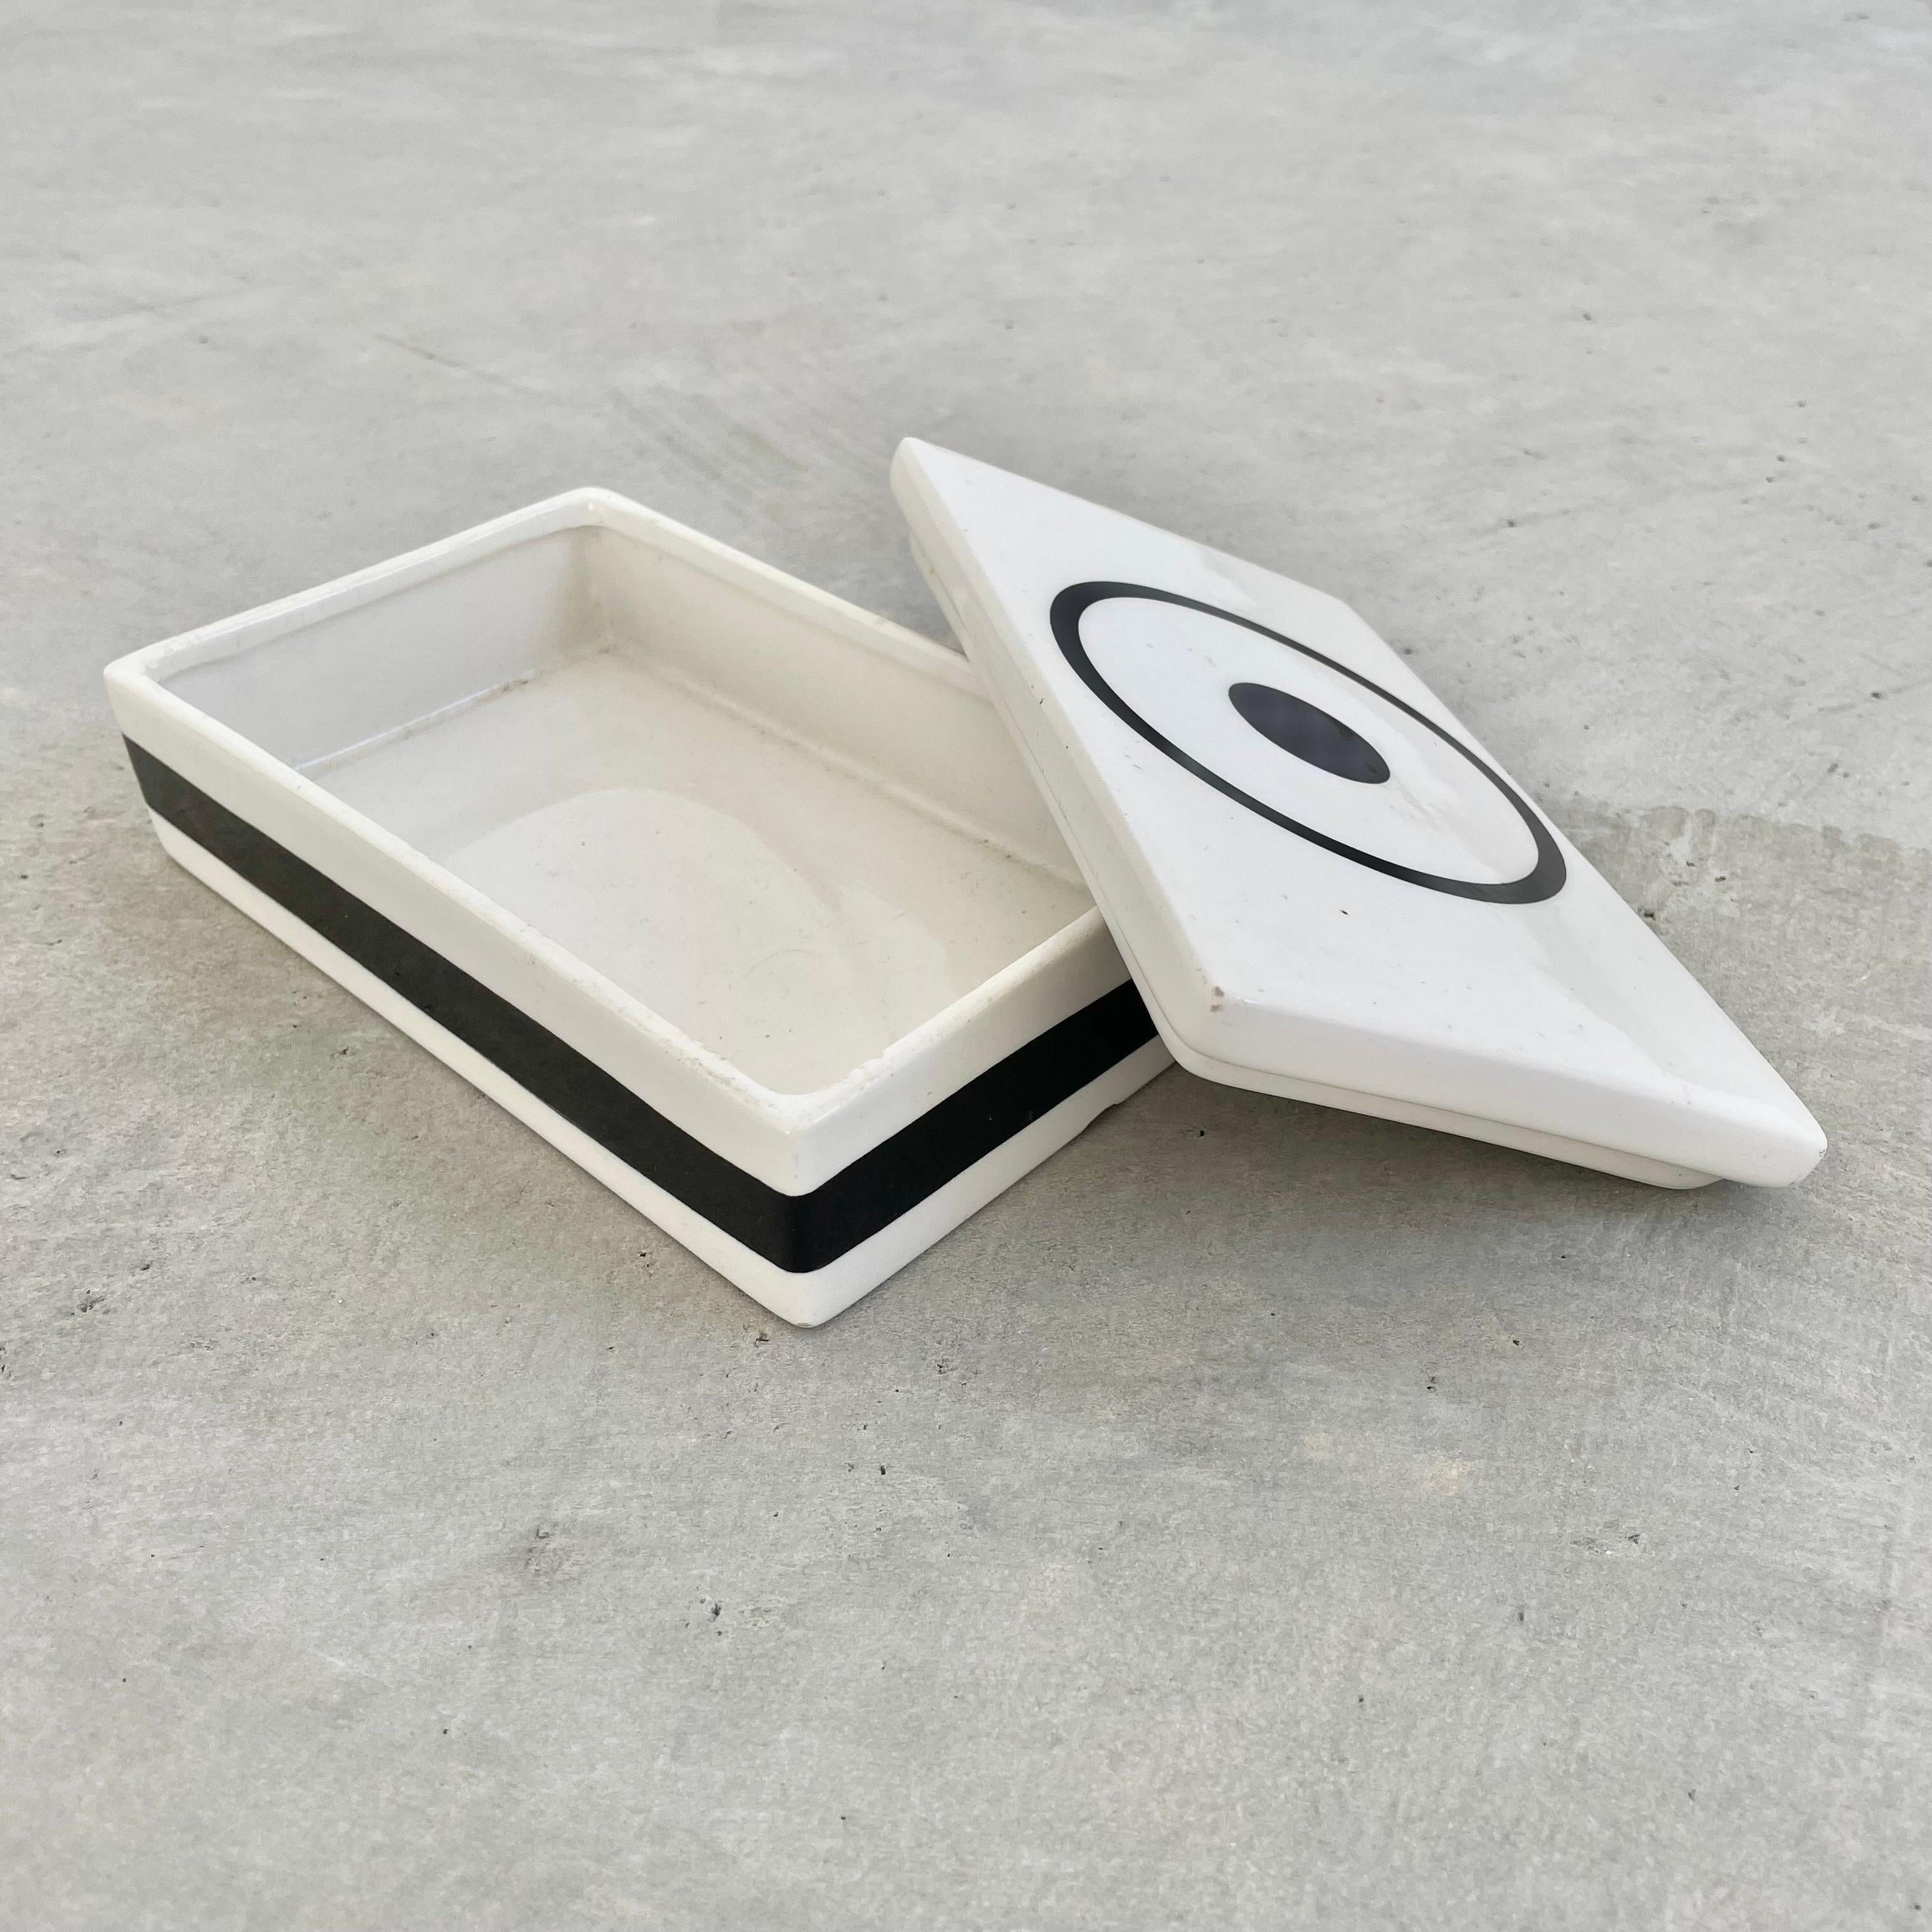 Artsy ceramic box made in Italy, circa 1970s. White box with black Bullseye painted on lid as well as a black stripe that goes around box. Great vintage condition. Fun stash box and tabletop object. Marked Mancioli Made in Italy and Raymor 1404 on